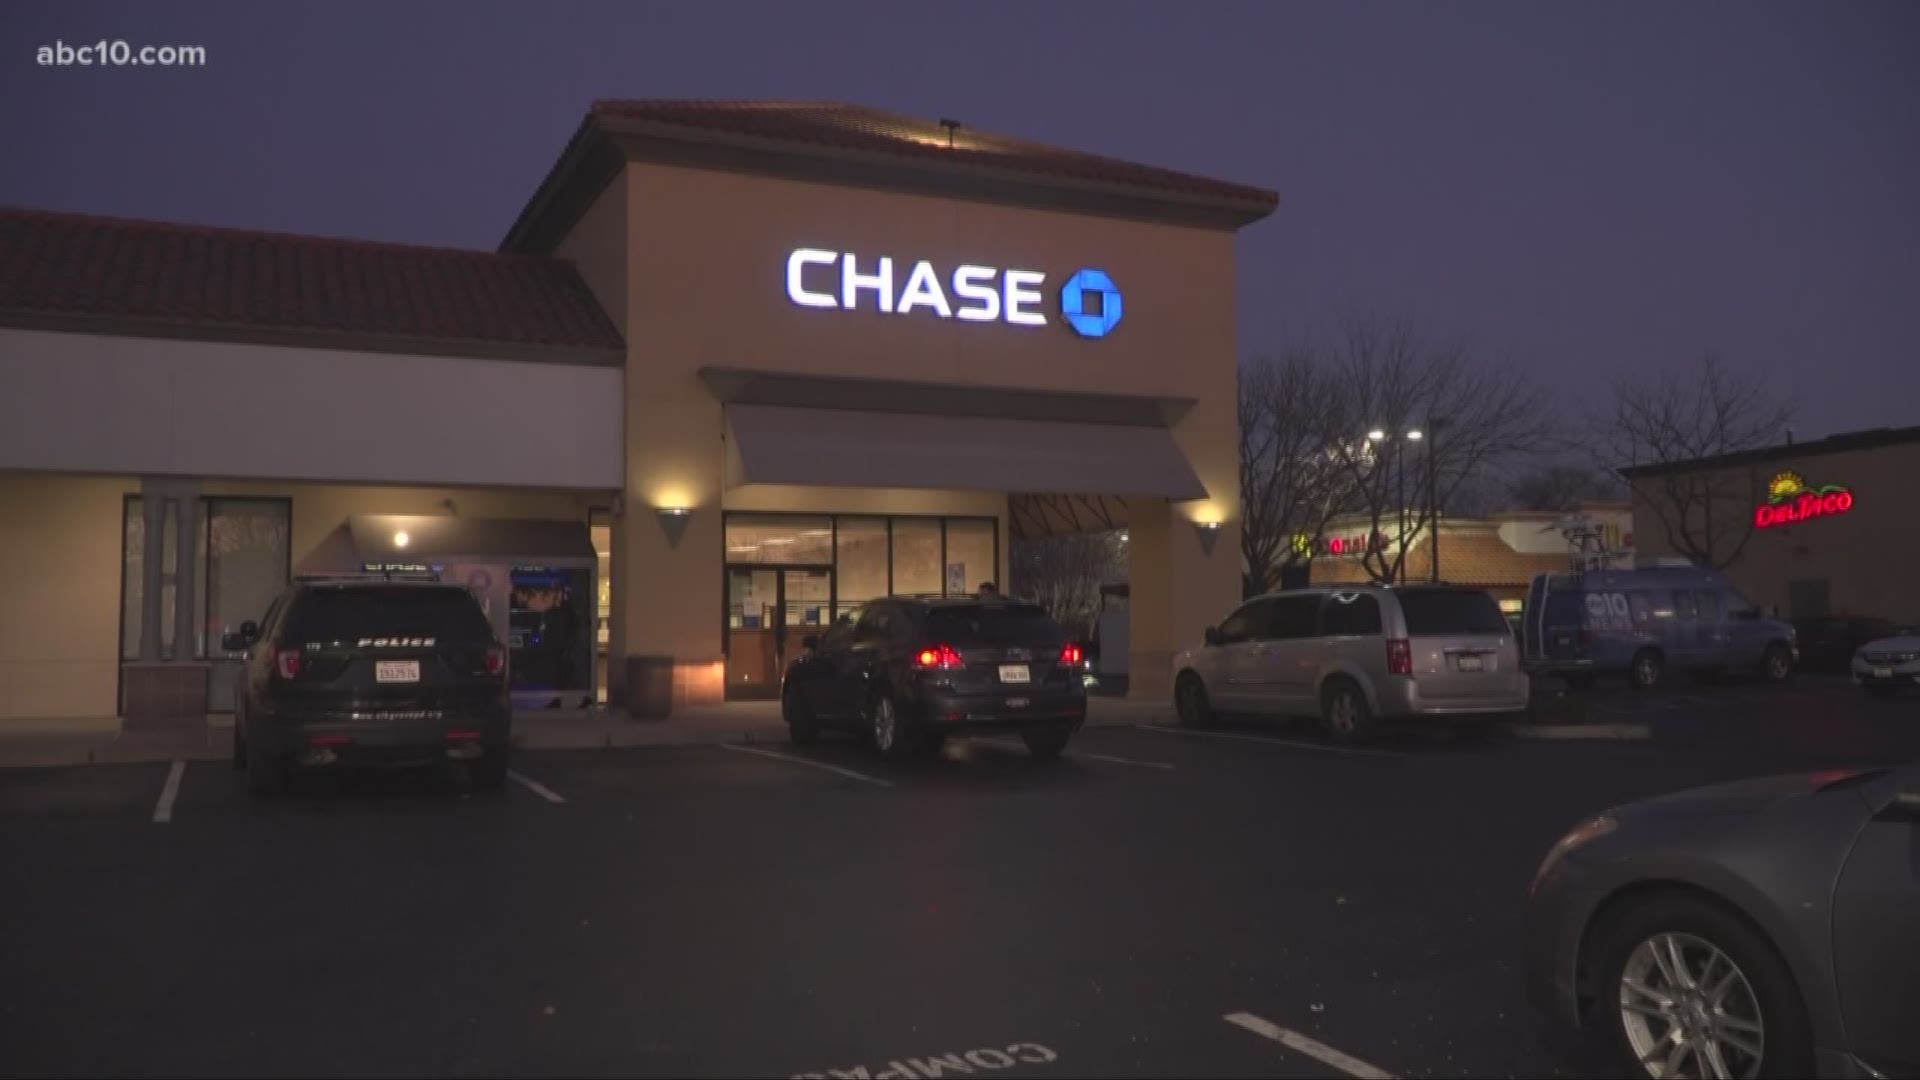 Elk Grove police said the 40-year-old suspect had the bank's money with him when he was arrested.